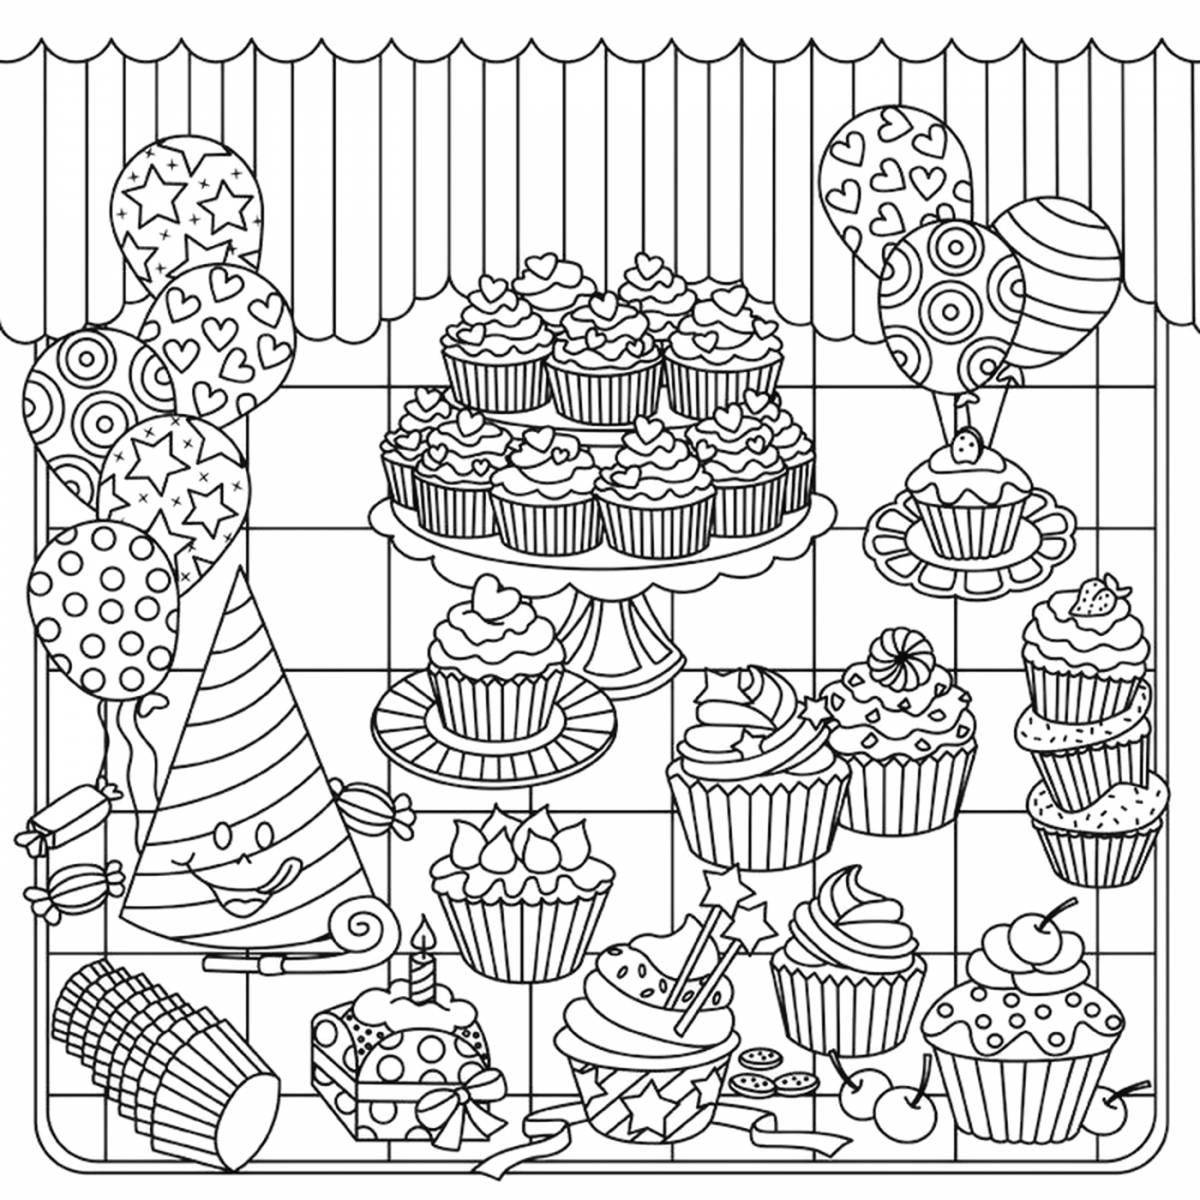 Heavenly appetizing coloring book